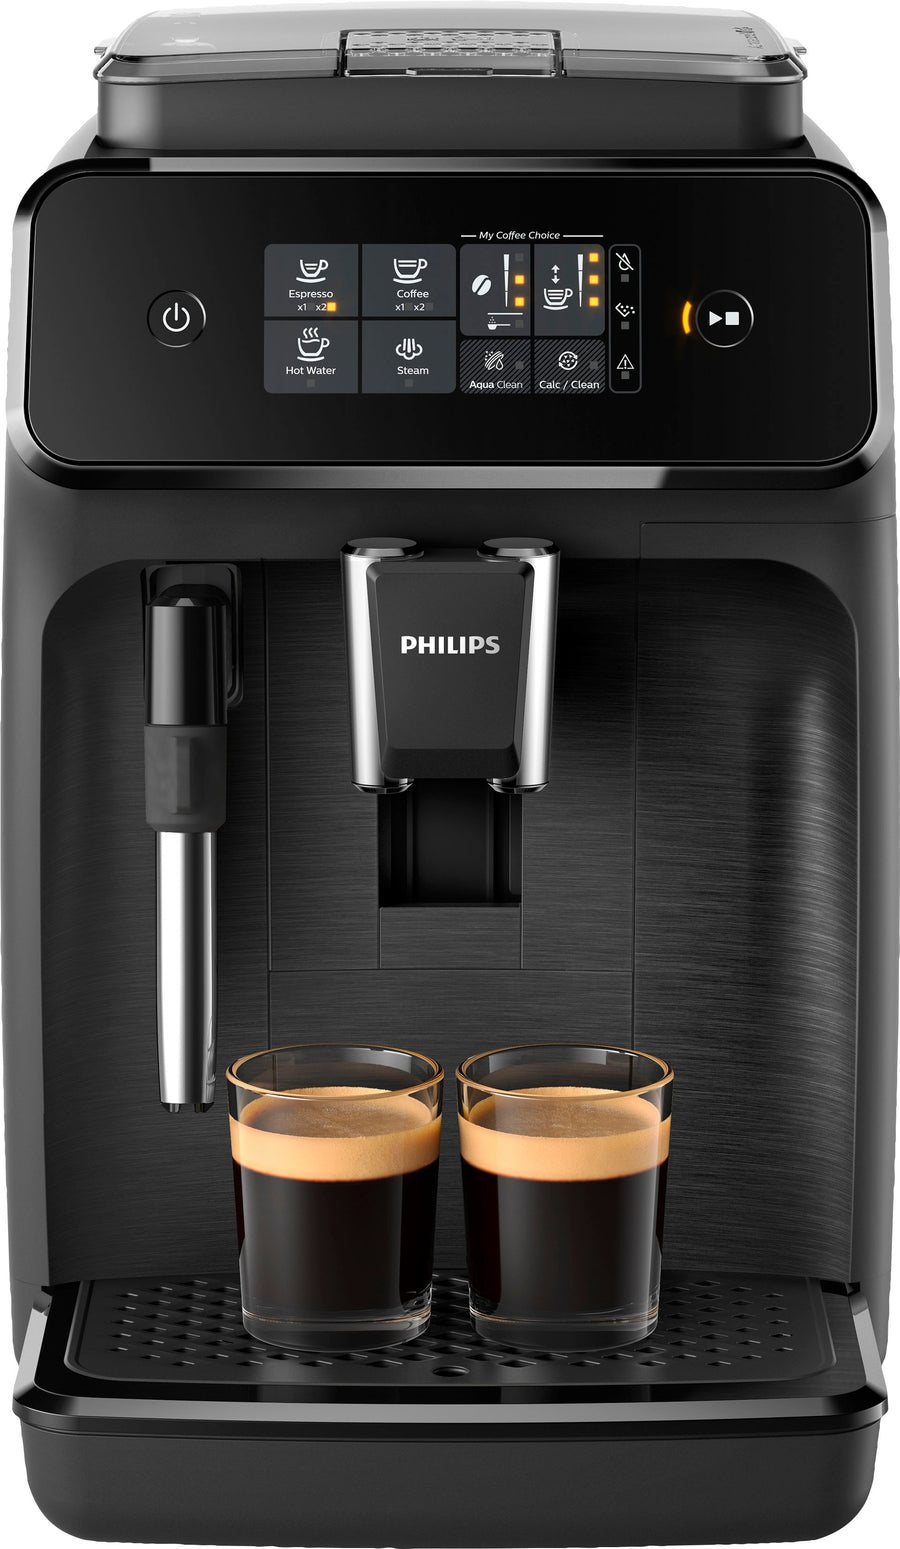 Philips 1200 Series Fully Automatic Espresso Machine with Milk Frother - Black_0